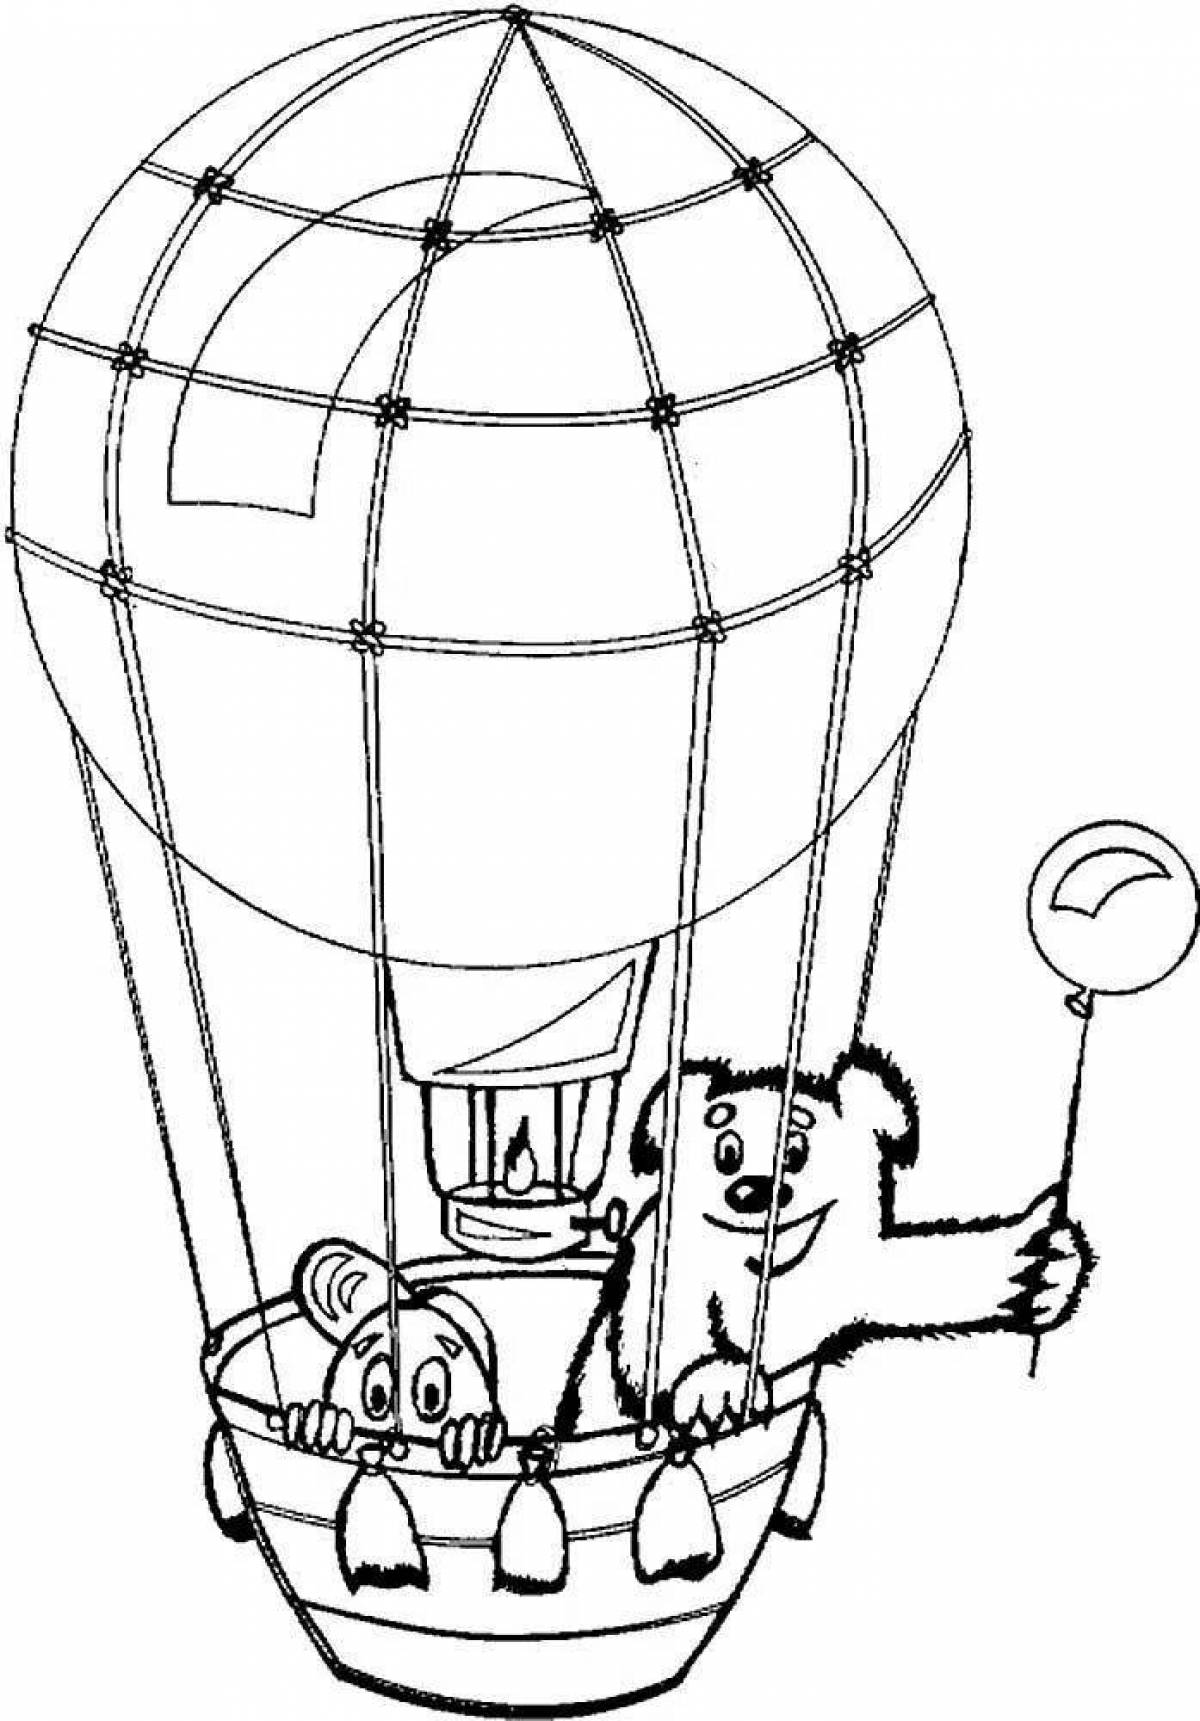 Shiny balloon with basket coloring book for kids